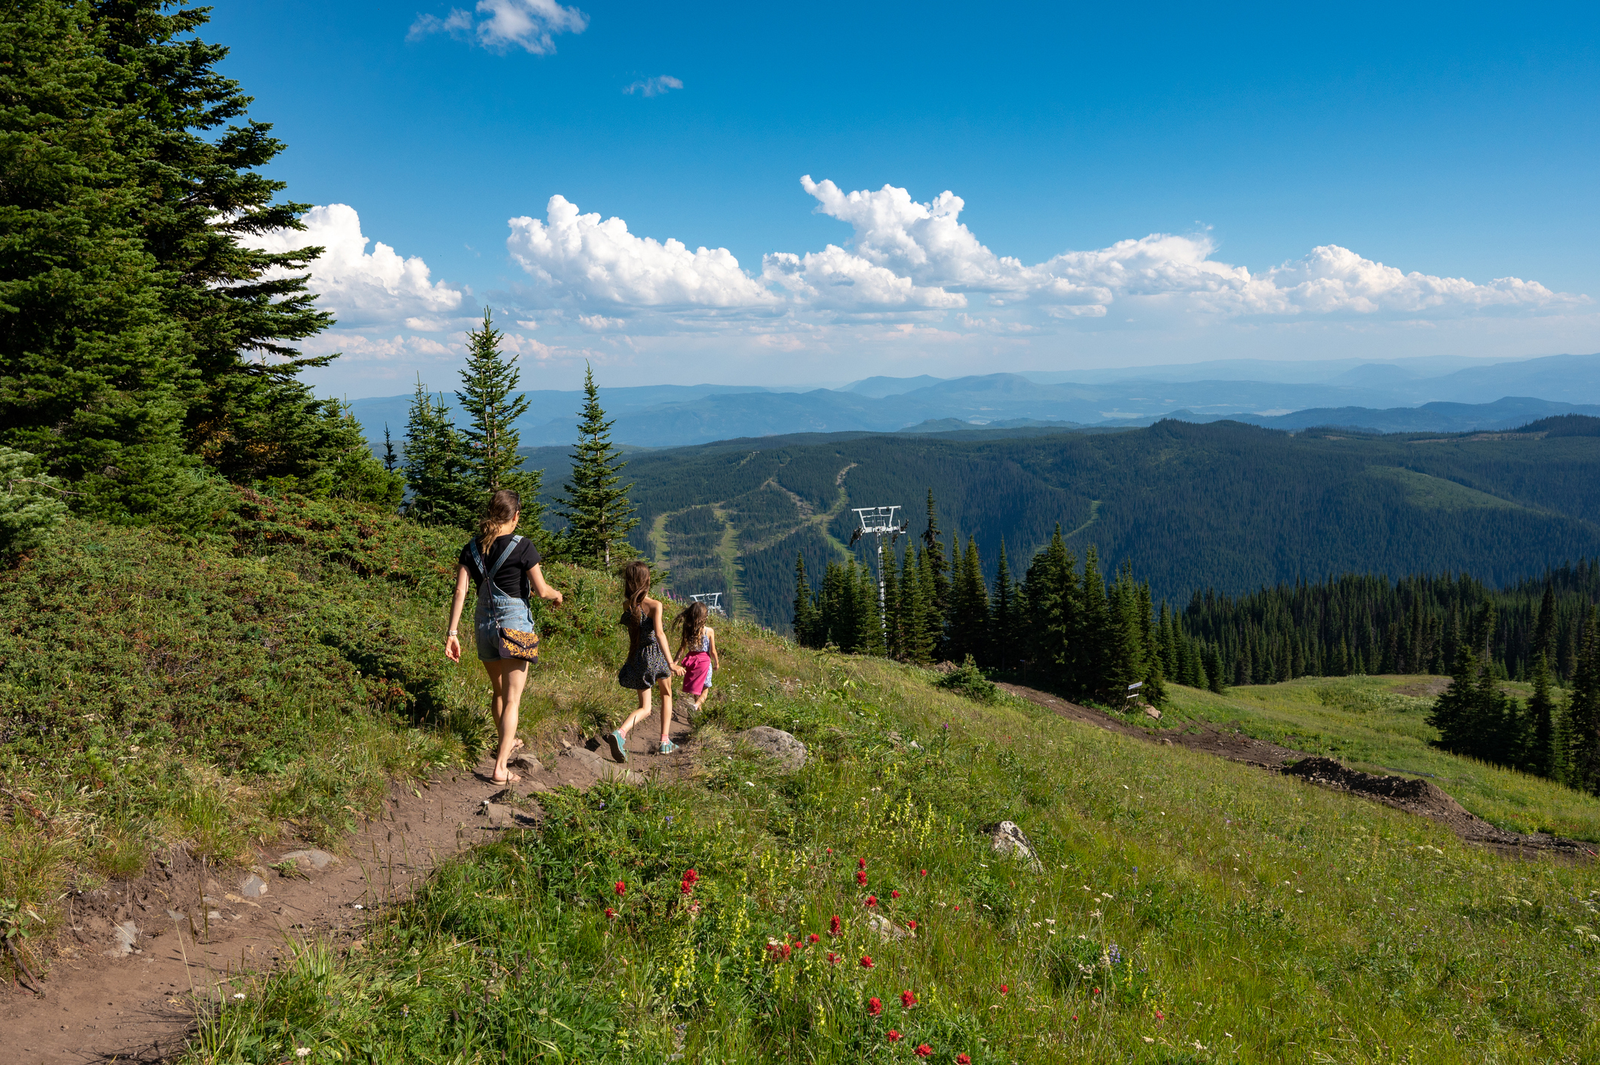 Ski Lifts at Sun Peaks Resort allow for summer hikes amongst wildflowers